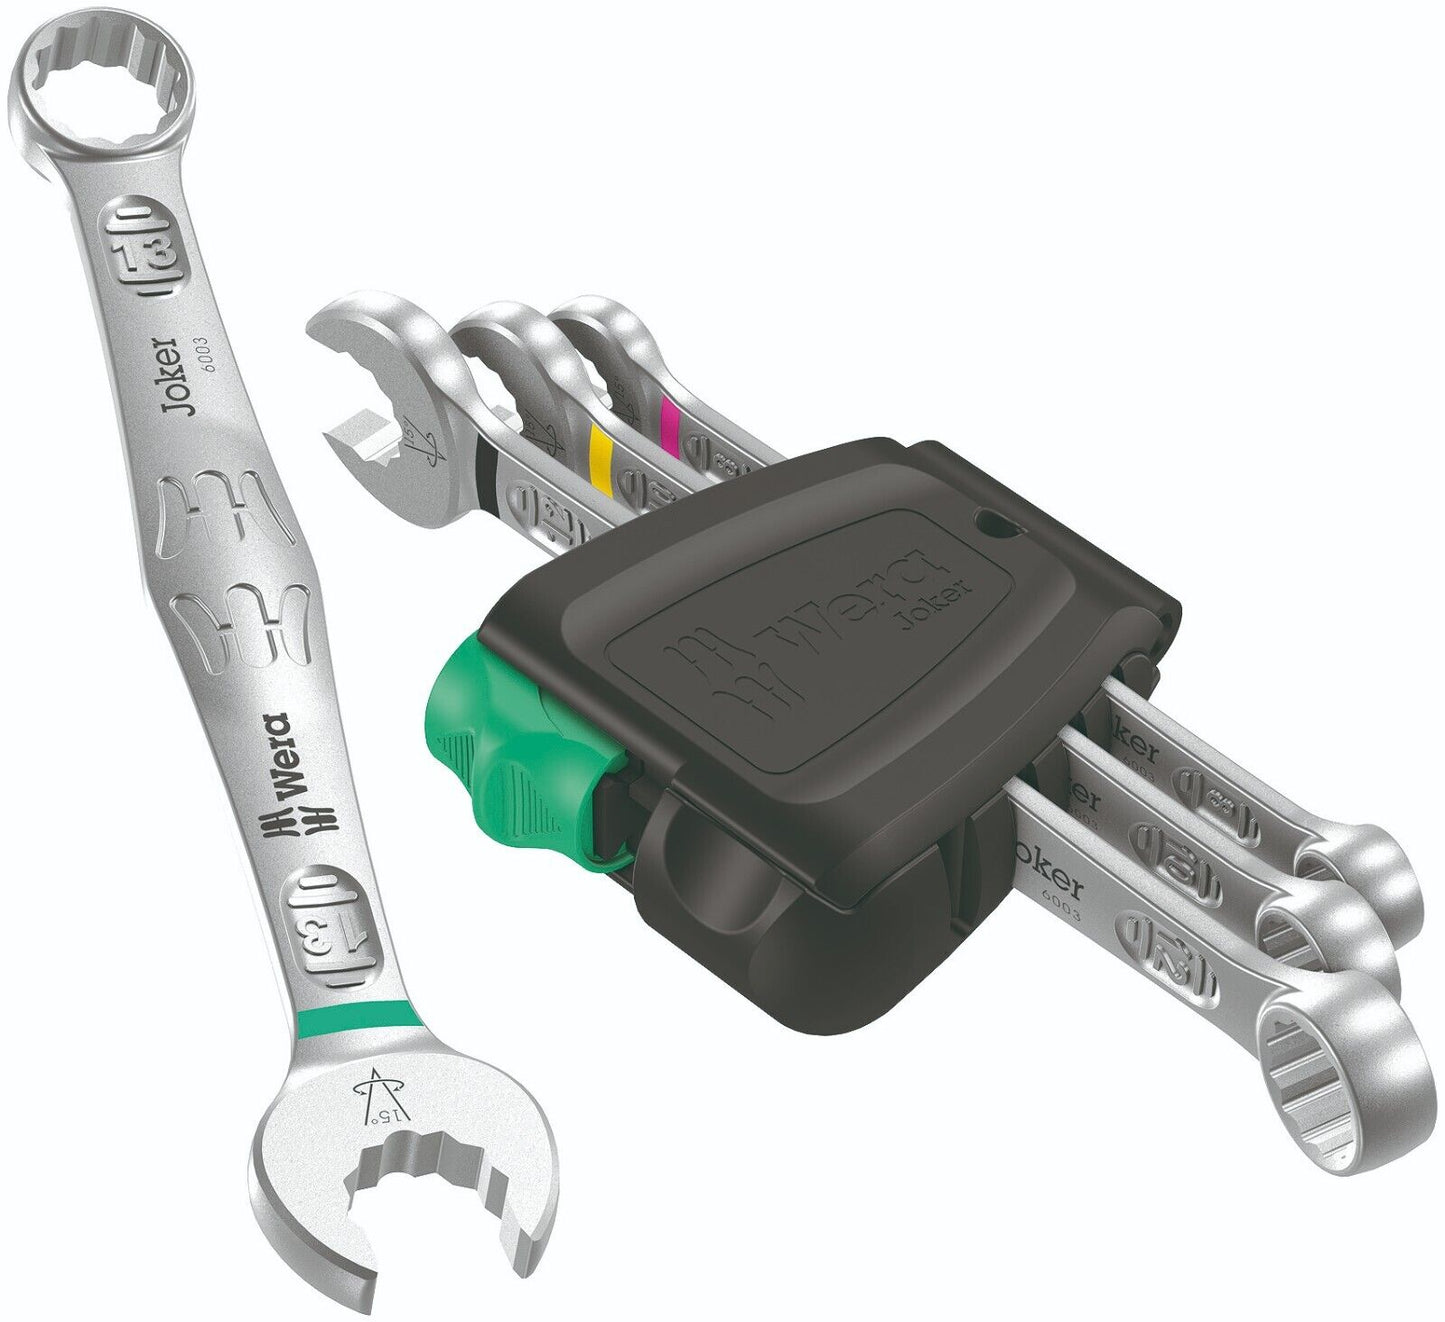 Wera 6003 JOKER Ring Combination Spanner Wrench All Sizes Sets